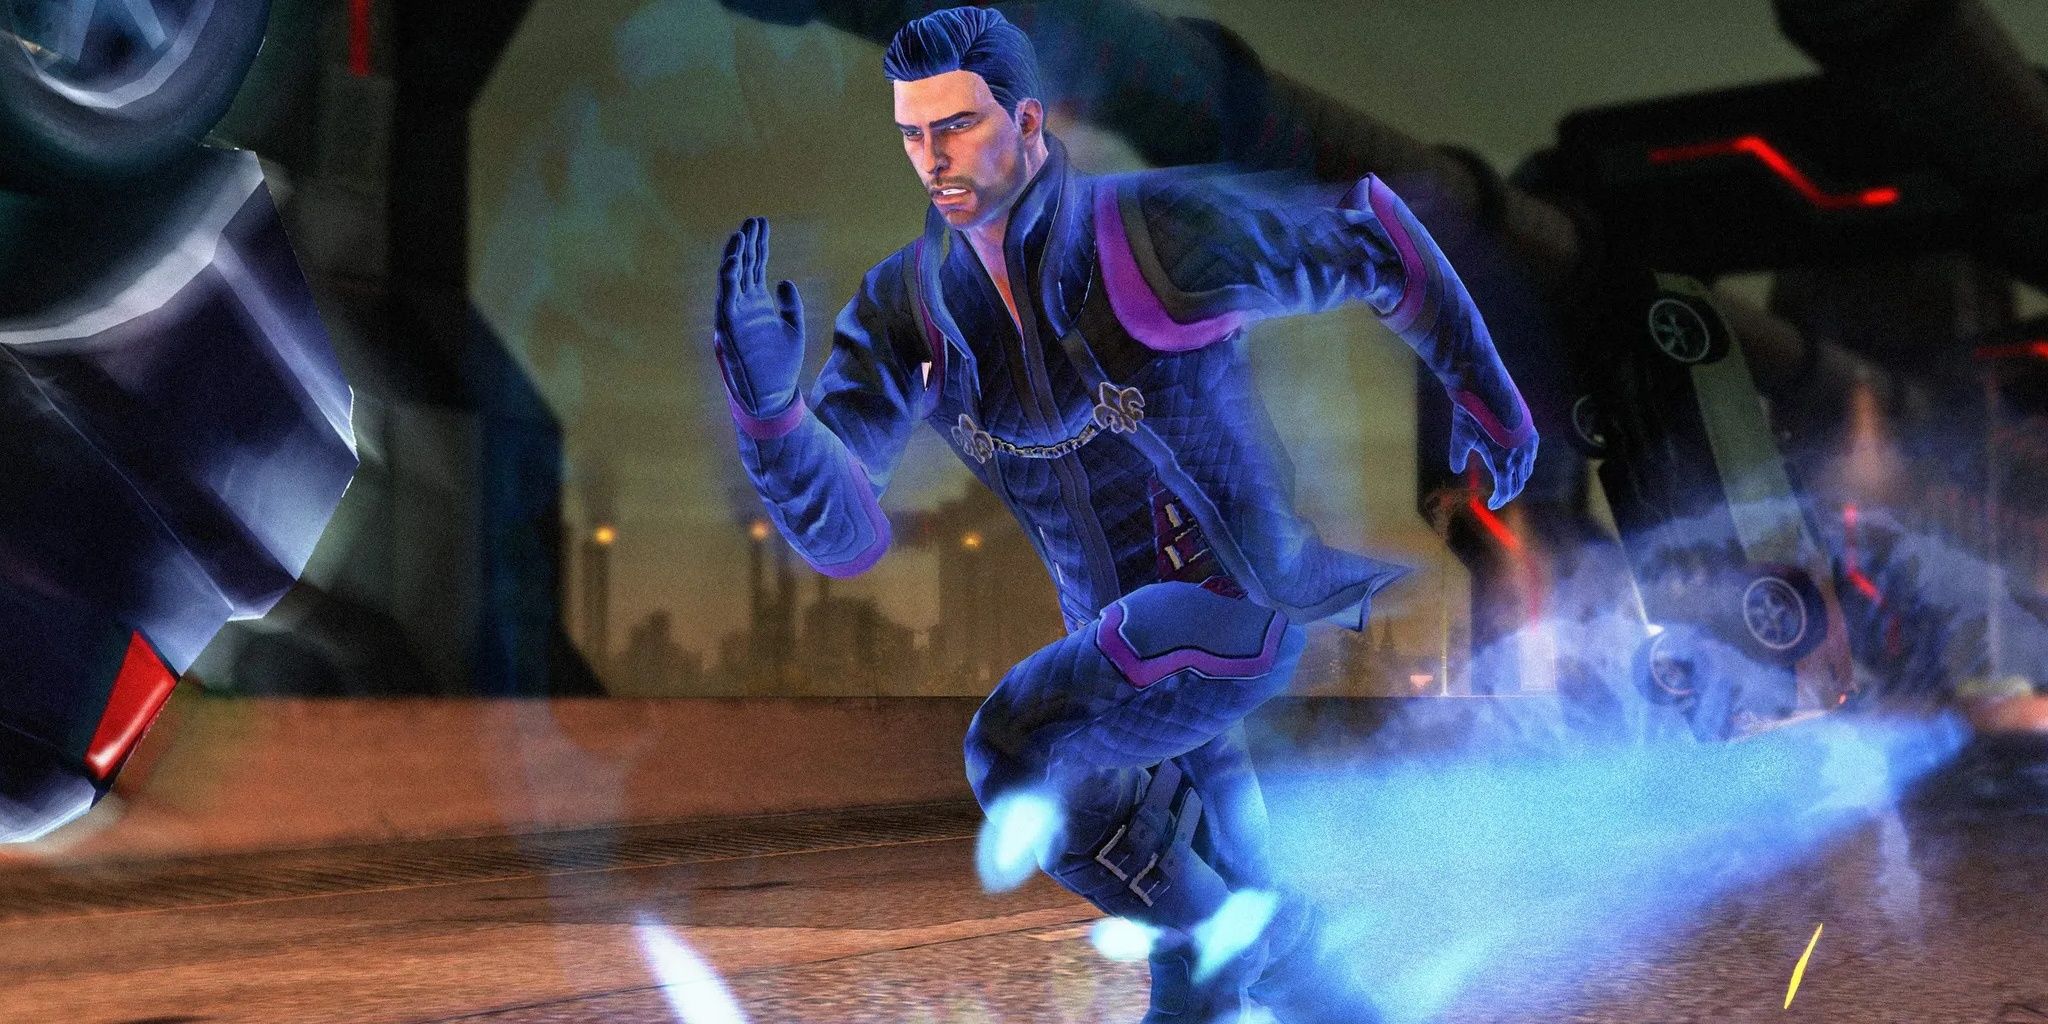 Saints Row IV Copies To Be Upgraded For Free Next Week